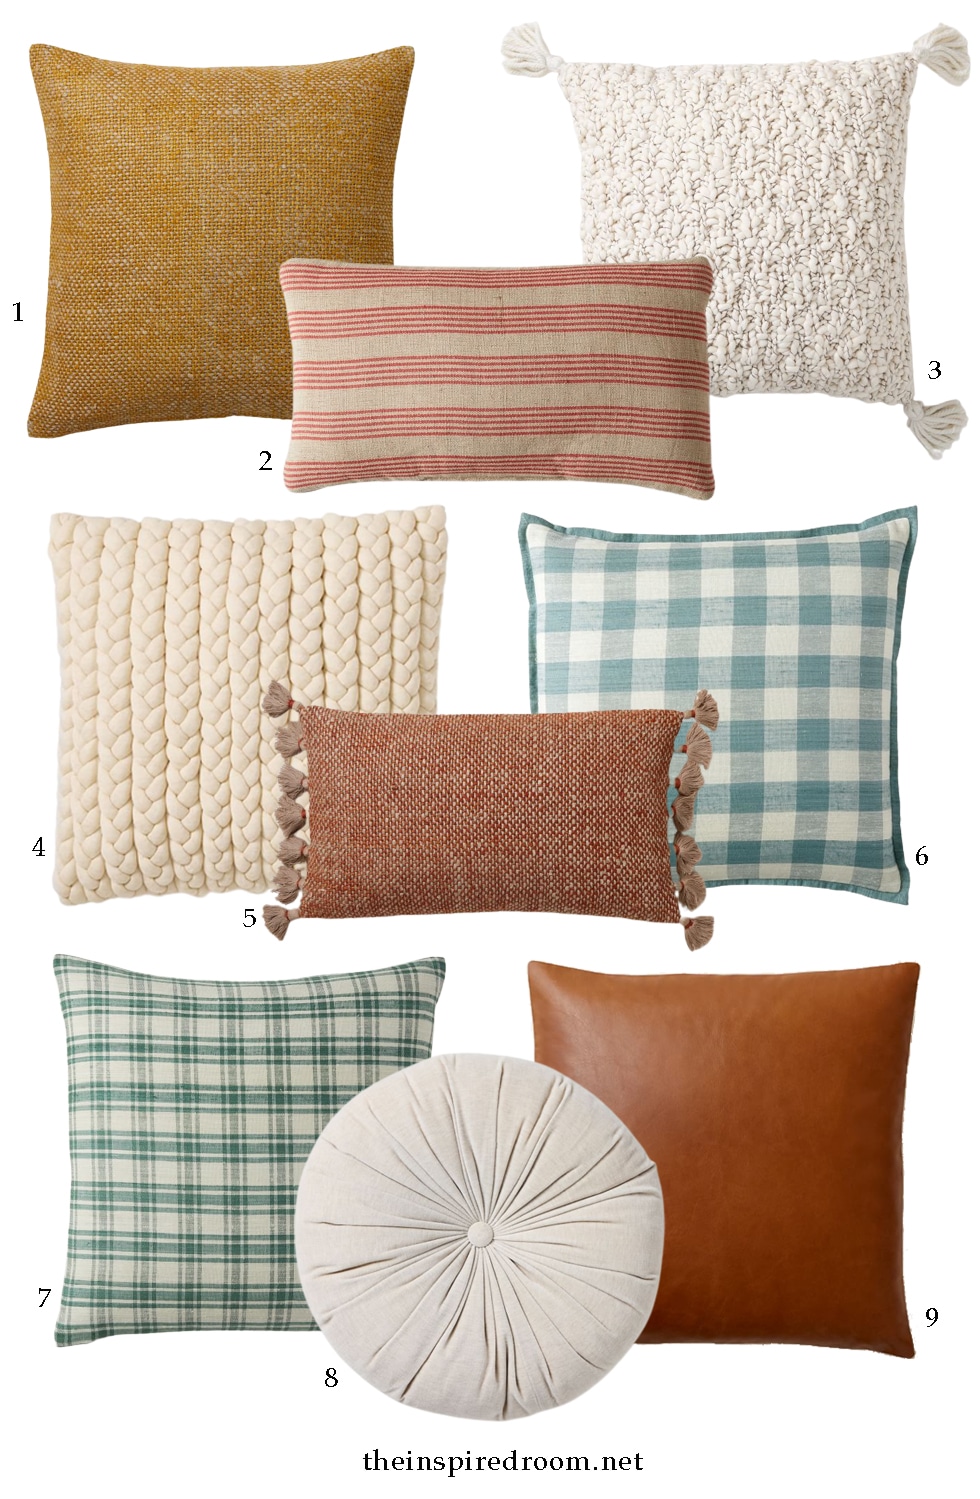 The Ultimate Decorative Pillows Roundup + 9 Pretty Pillow Pairing Combinations!